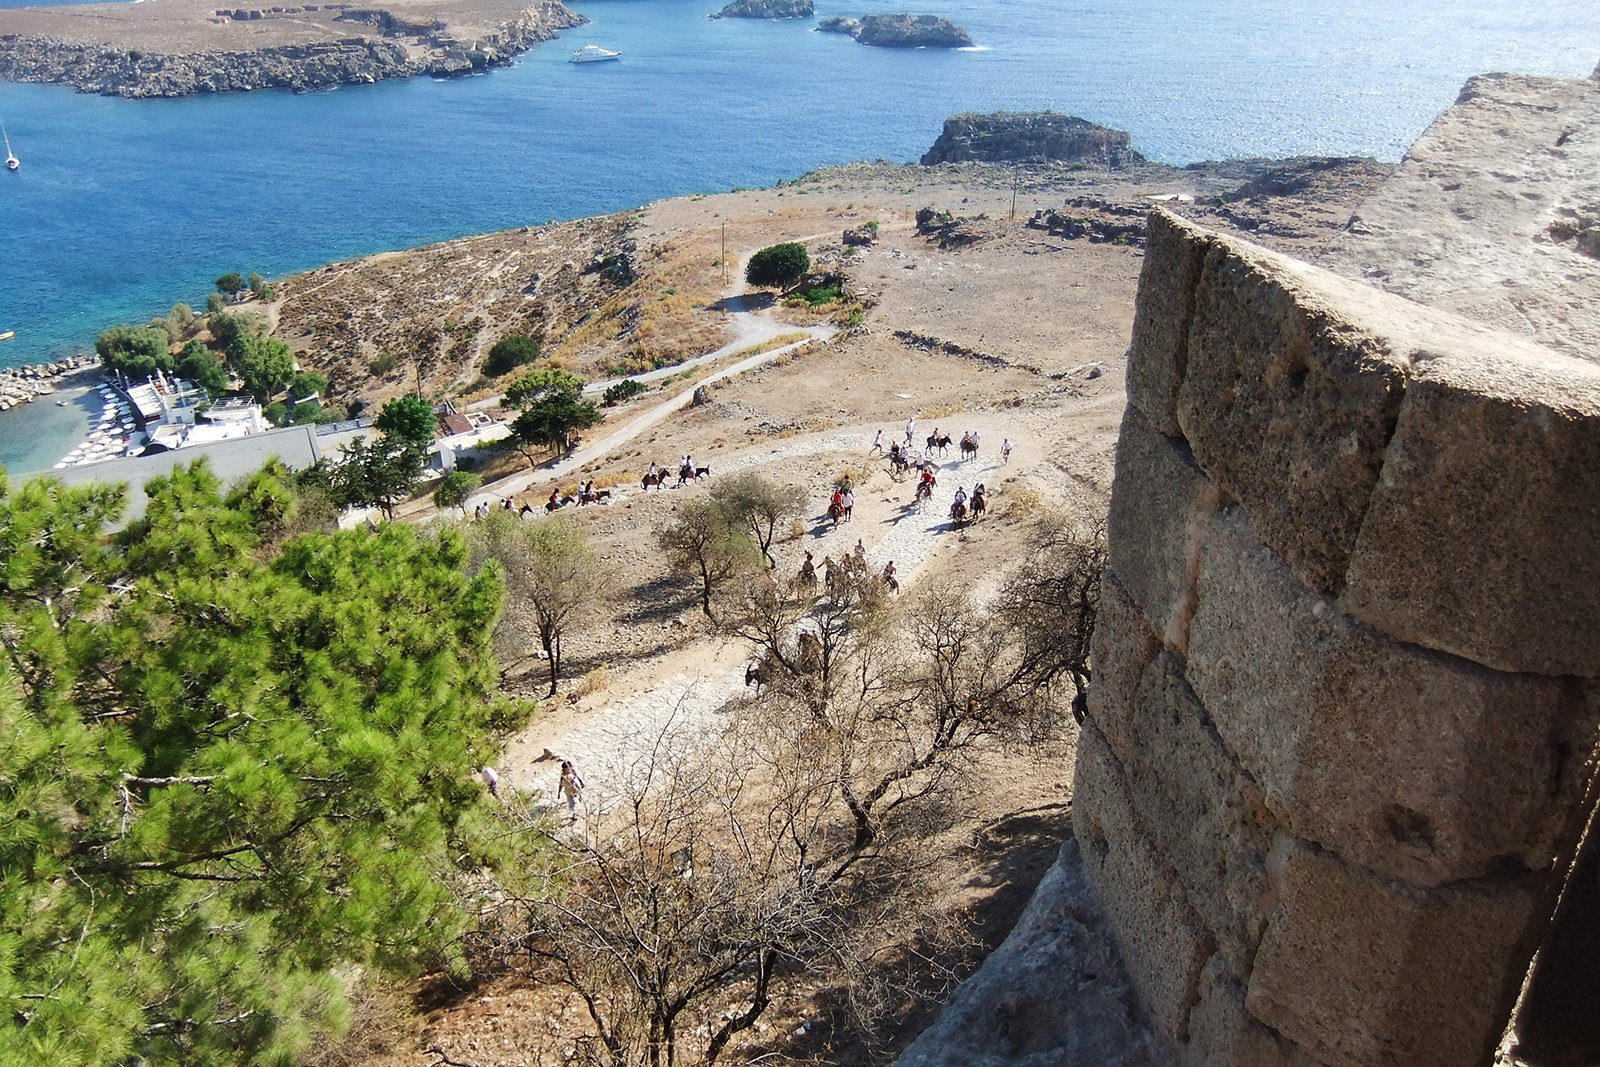 How to see the Acropolis of Lindos on Rhodes